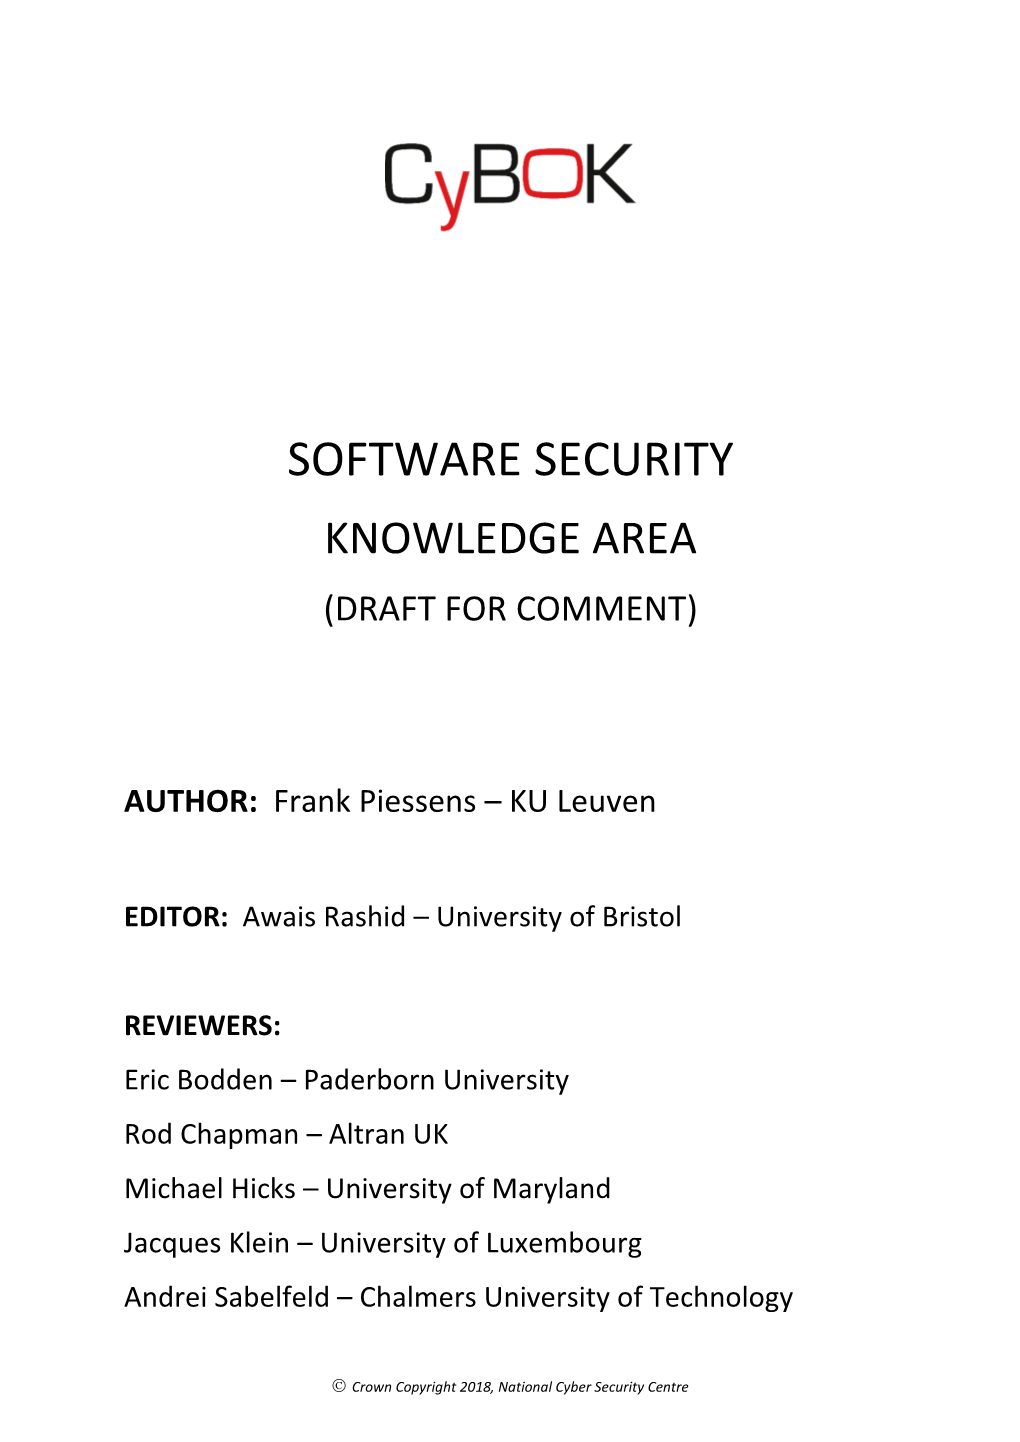 Software Security Knowledge Area (Draft for Comment)